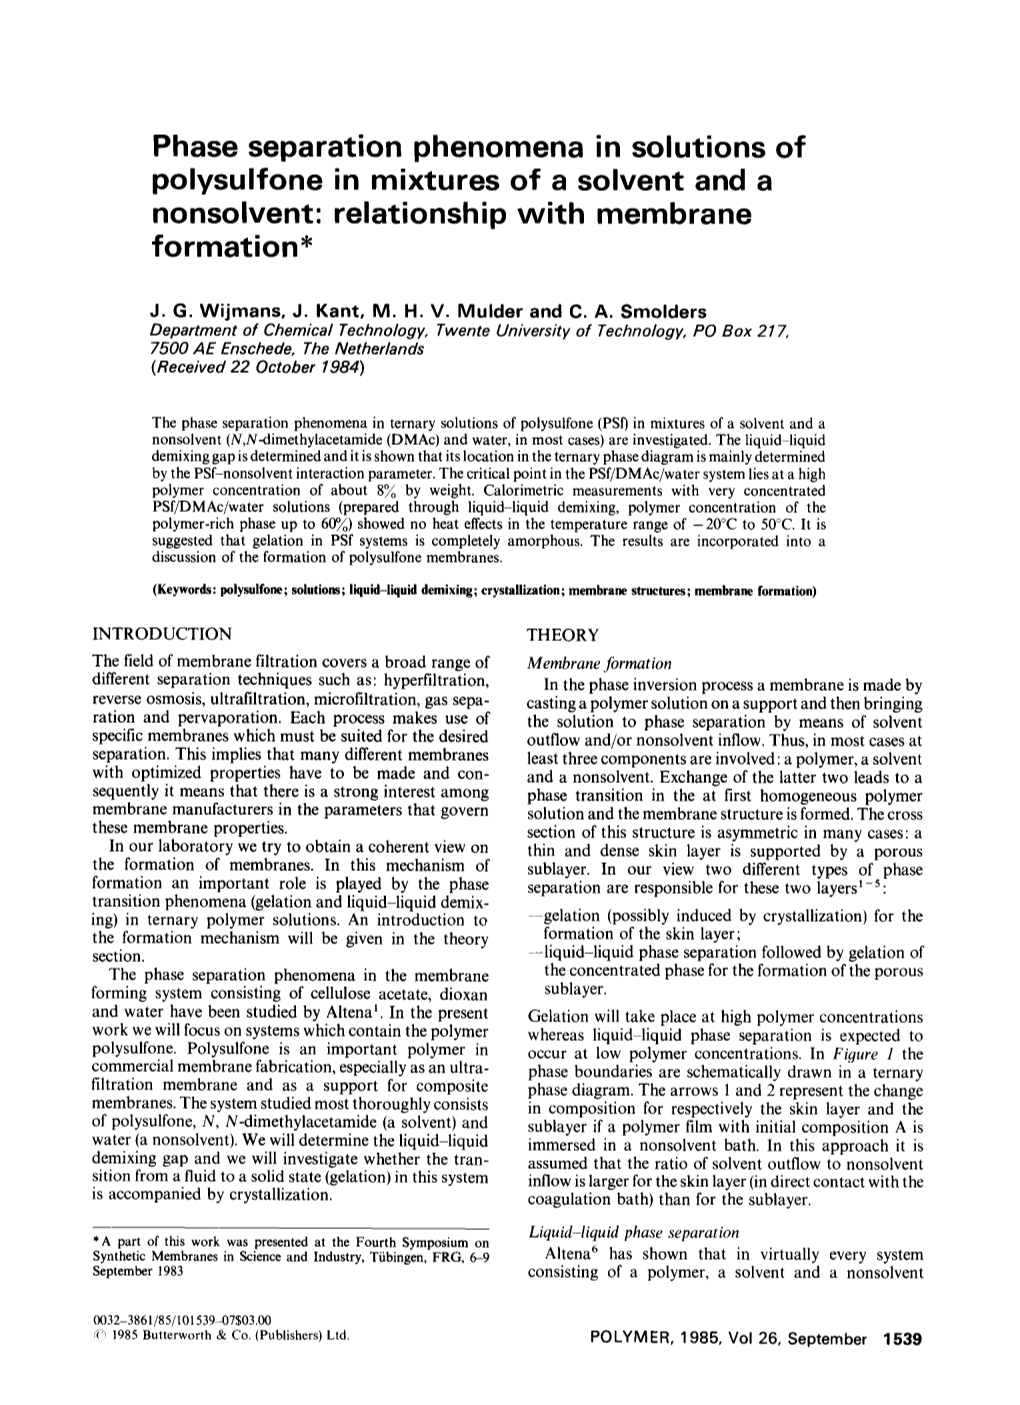 Phase Separation Phenomena in Solutions of Polysulfone in Mixtures of a Solvent and a Nonsolvent: Relationship with Membrane Formation*